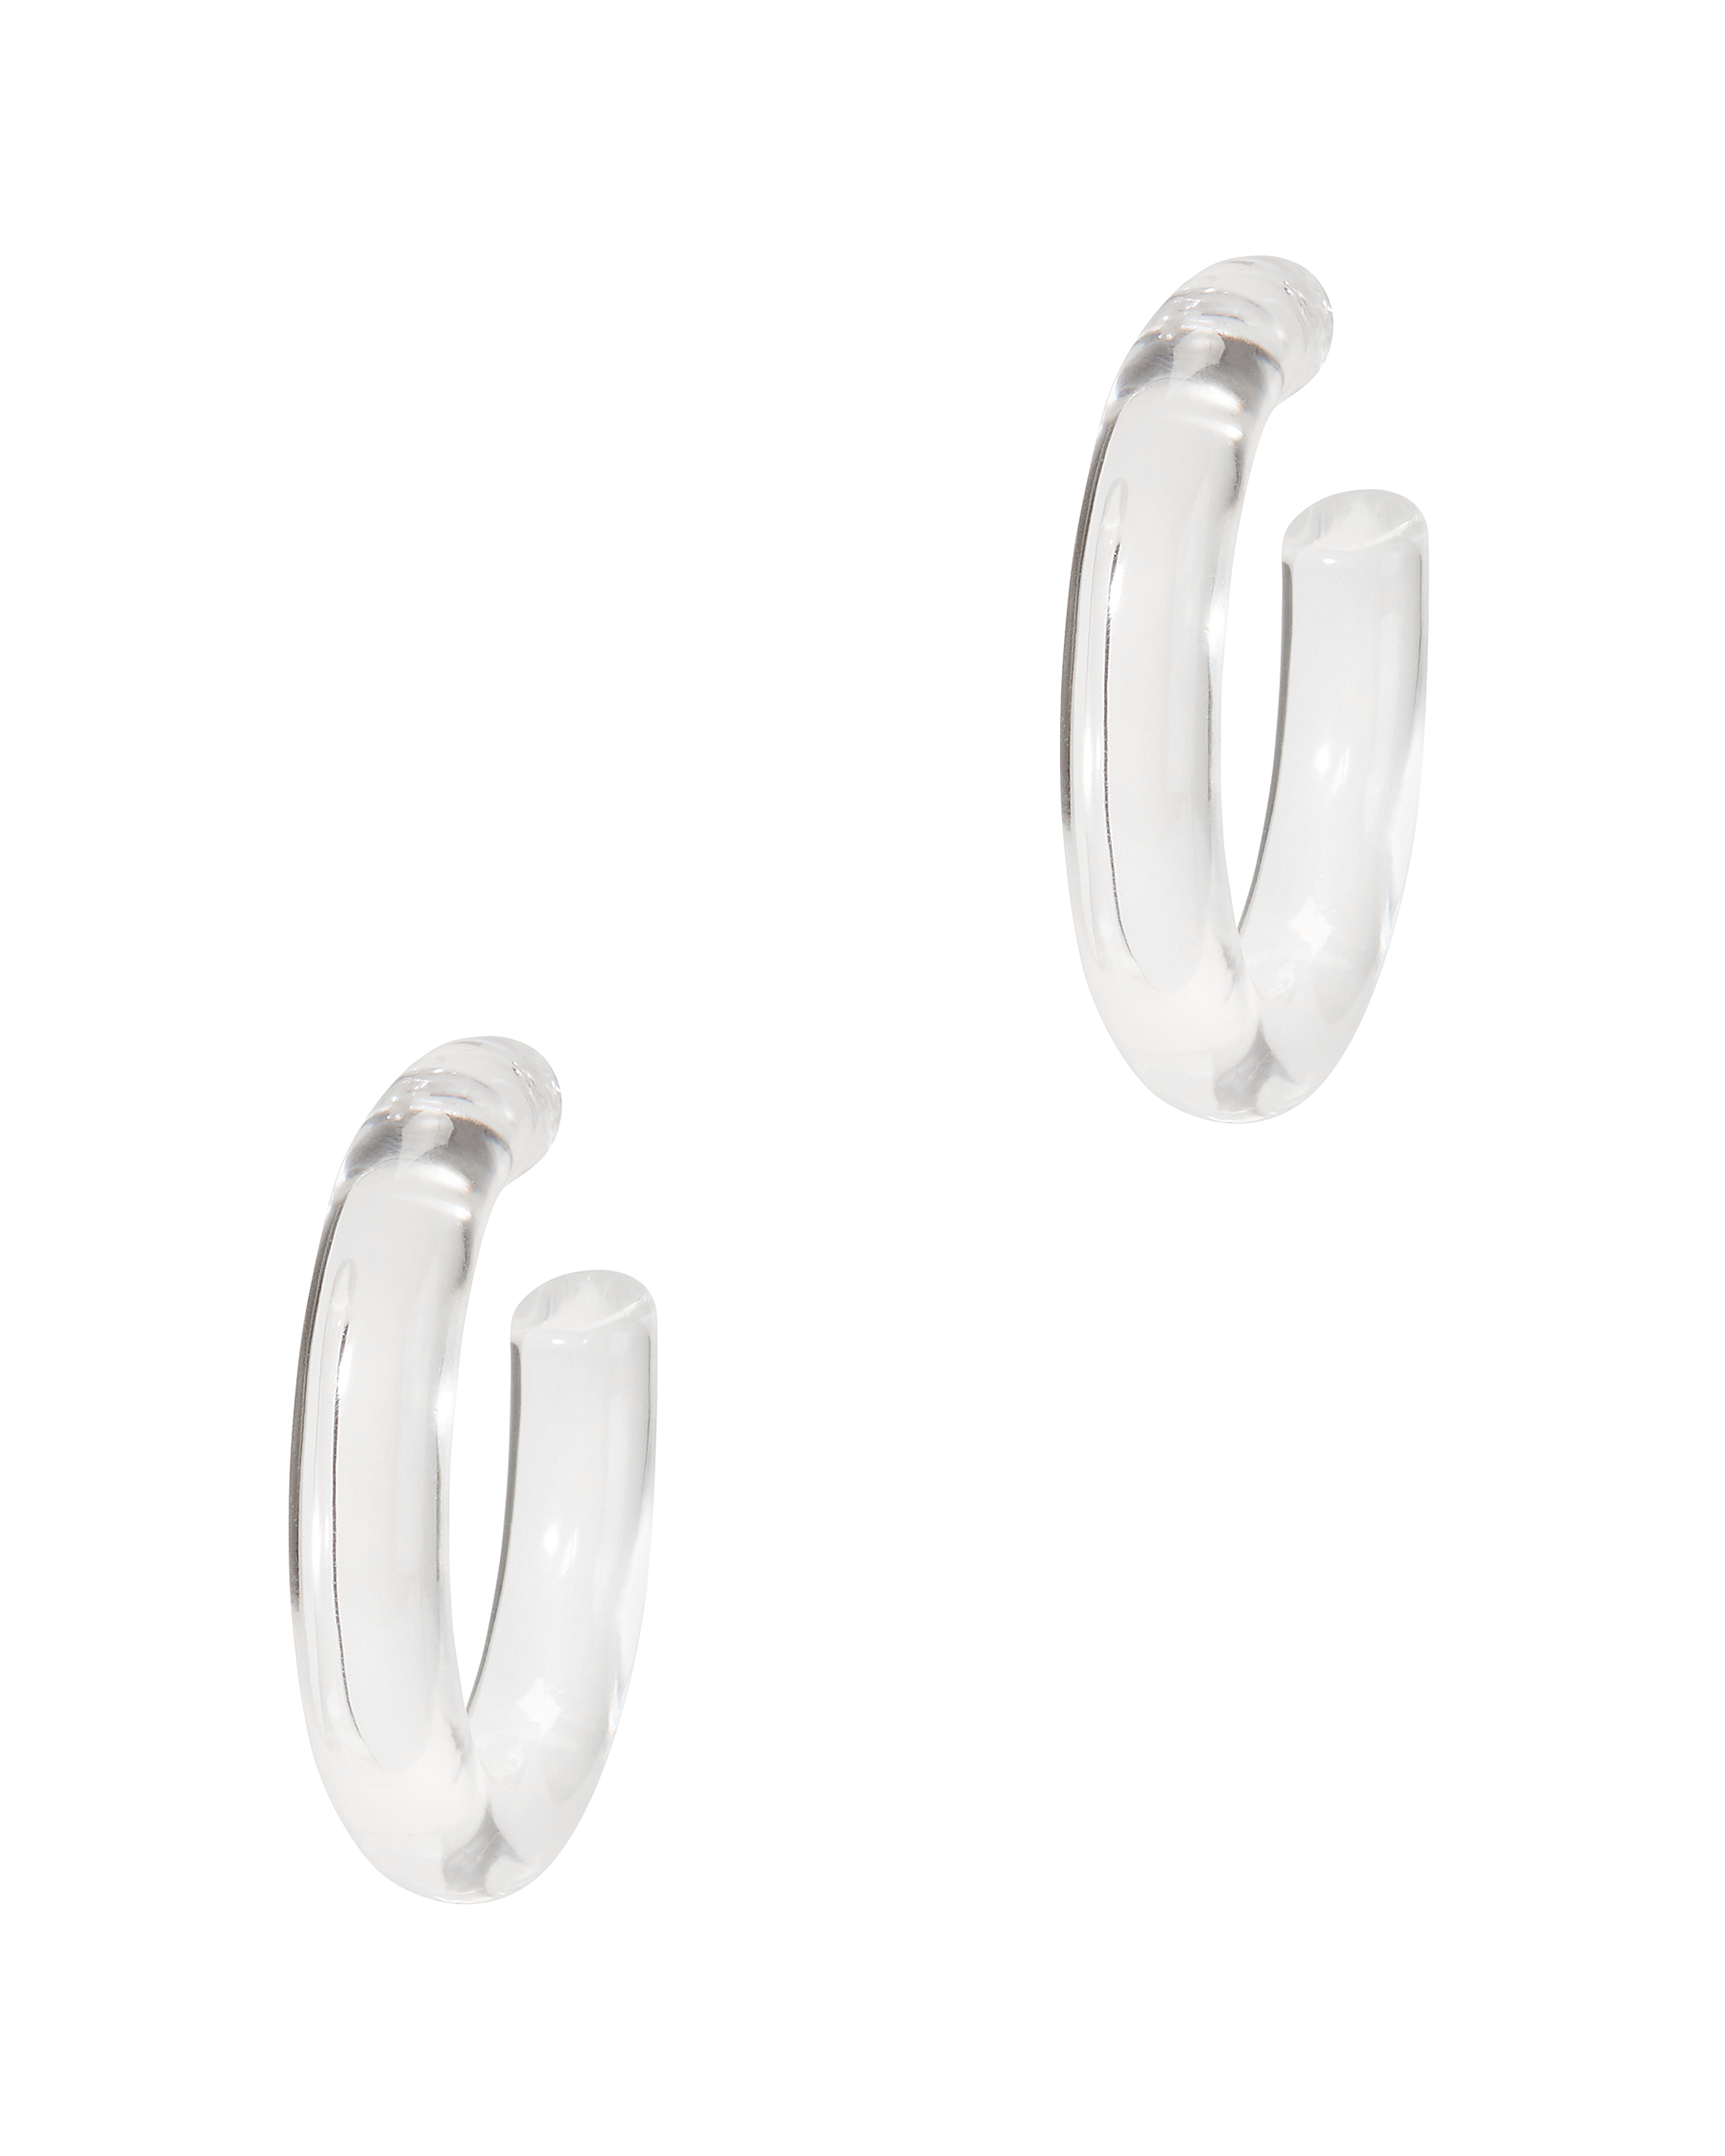 LIZZIE FORTUNATO Rome Clear Hoops,FW18E022